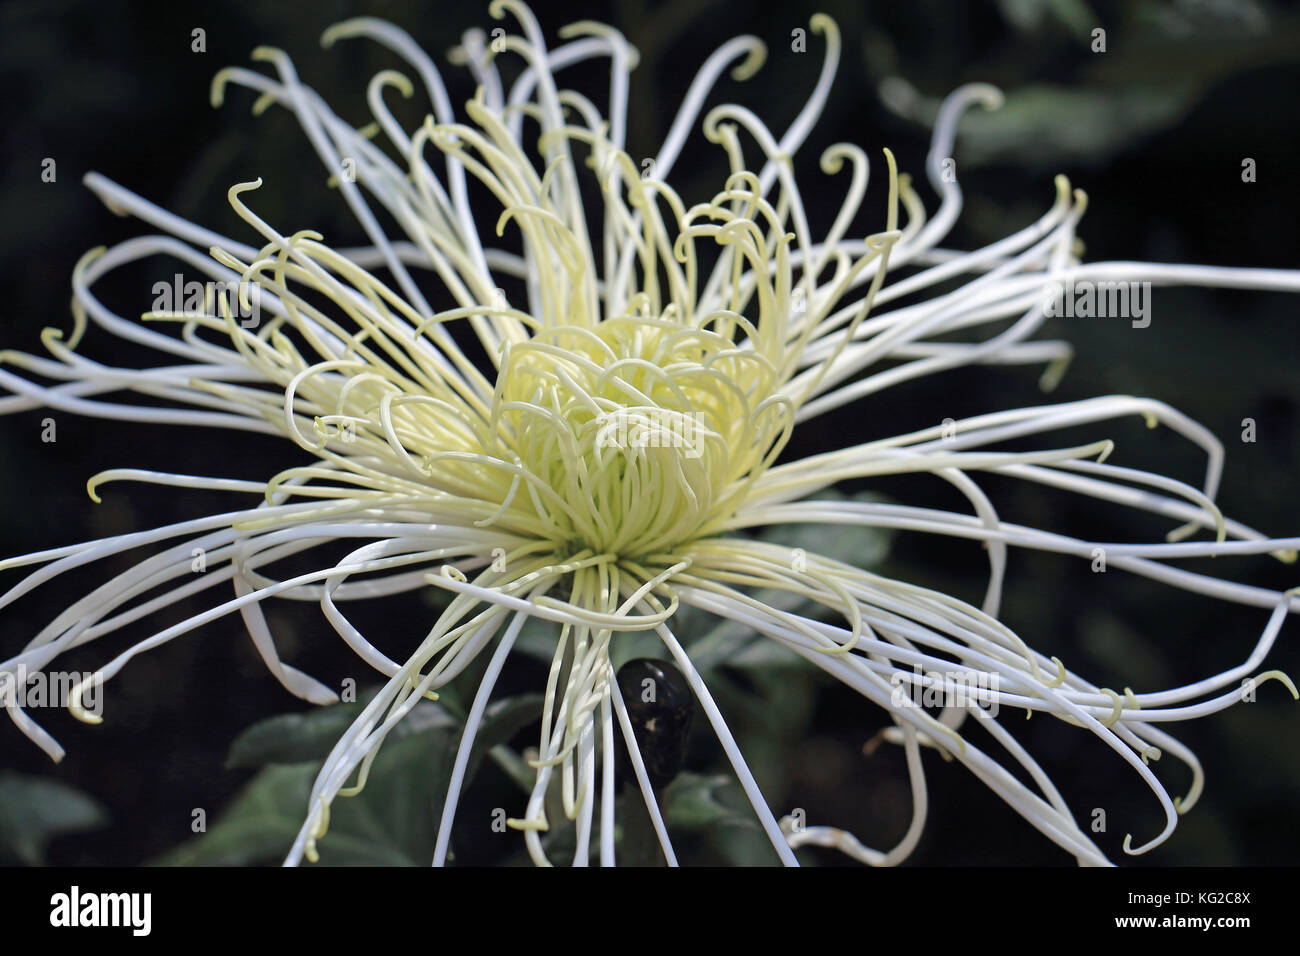 This interesting chrysanthemum (spider mum) spreads out its tangled thin and twisted petals Stock Photo